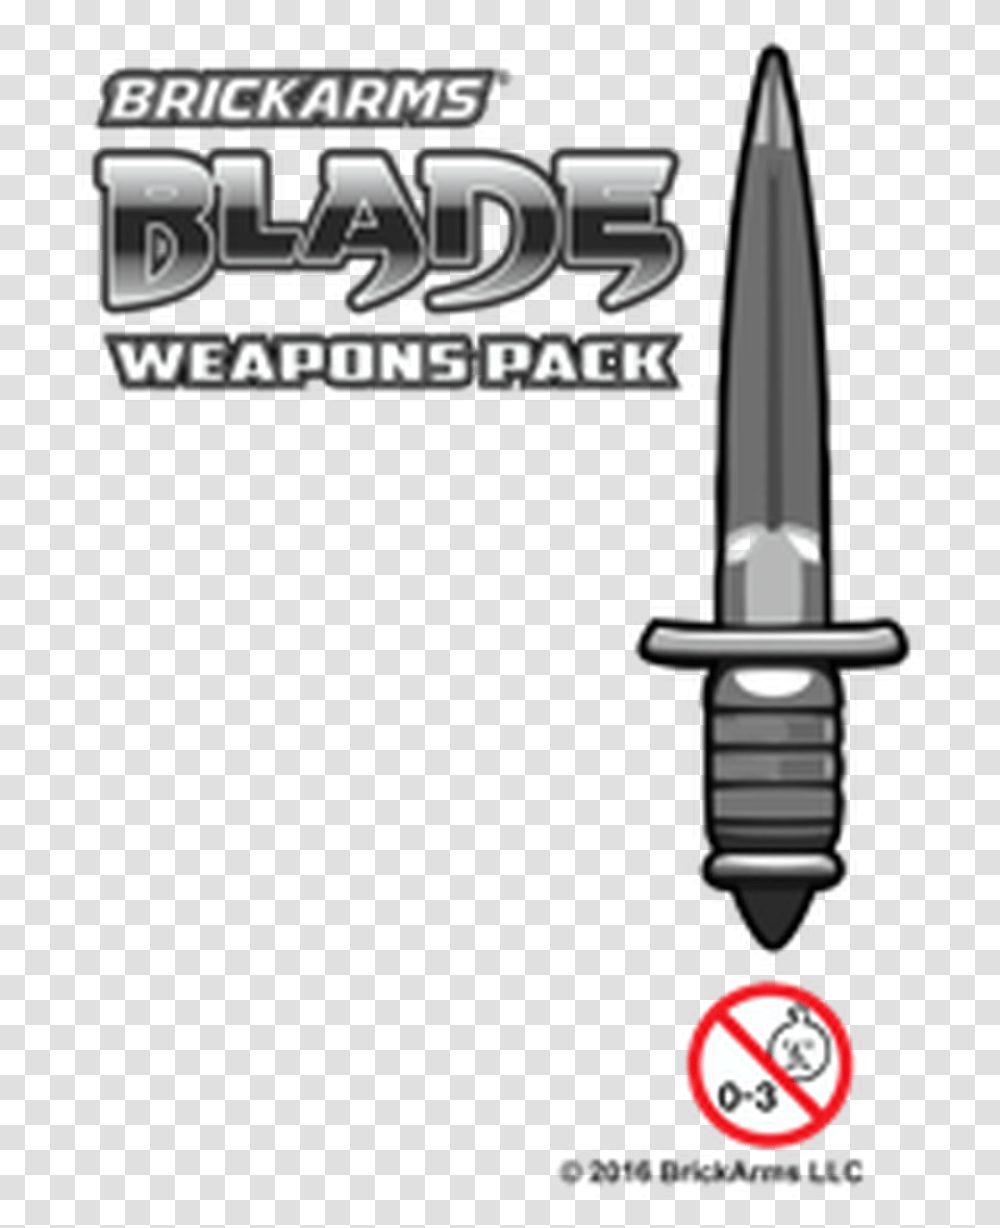 Brickarms Blade Weapons Pack Throwing Knife, Weaponry, Letter Opener Transparent Png